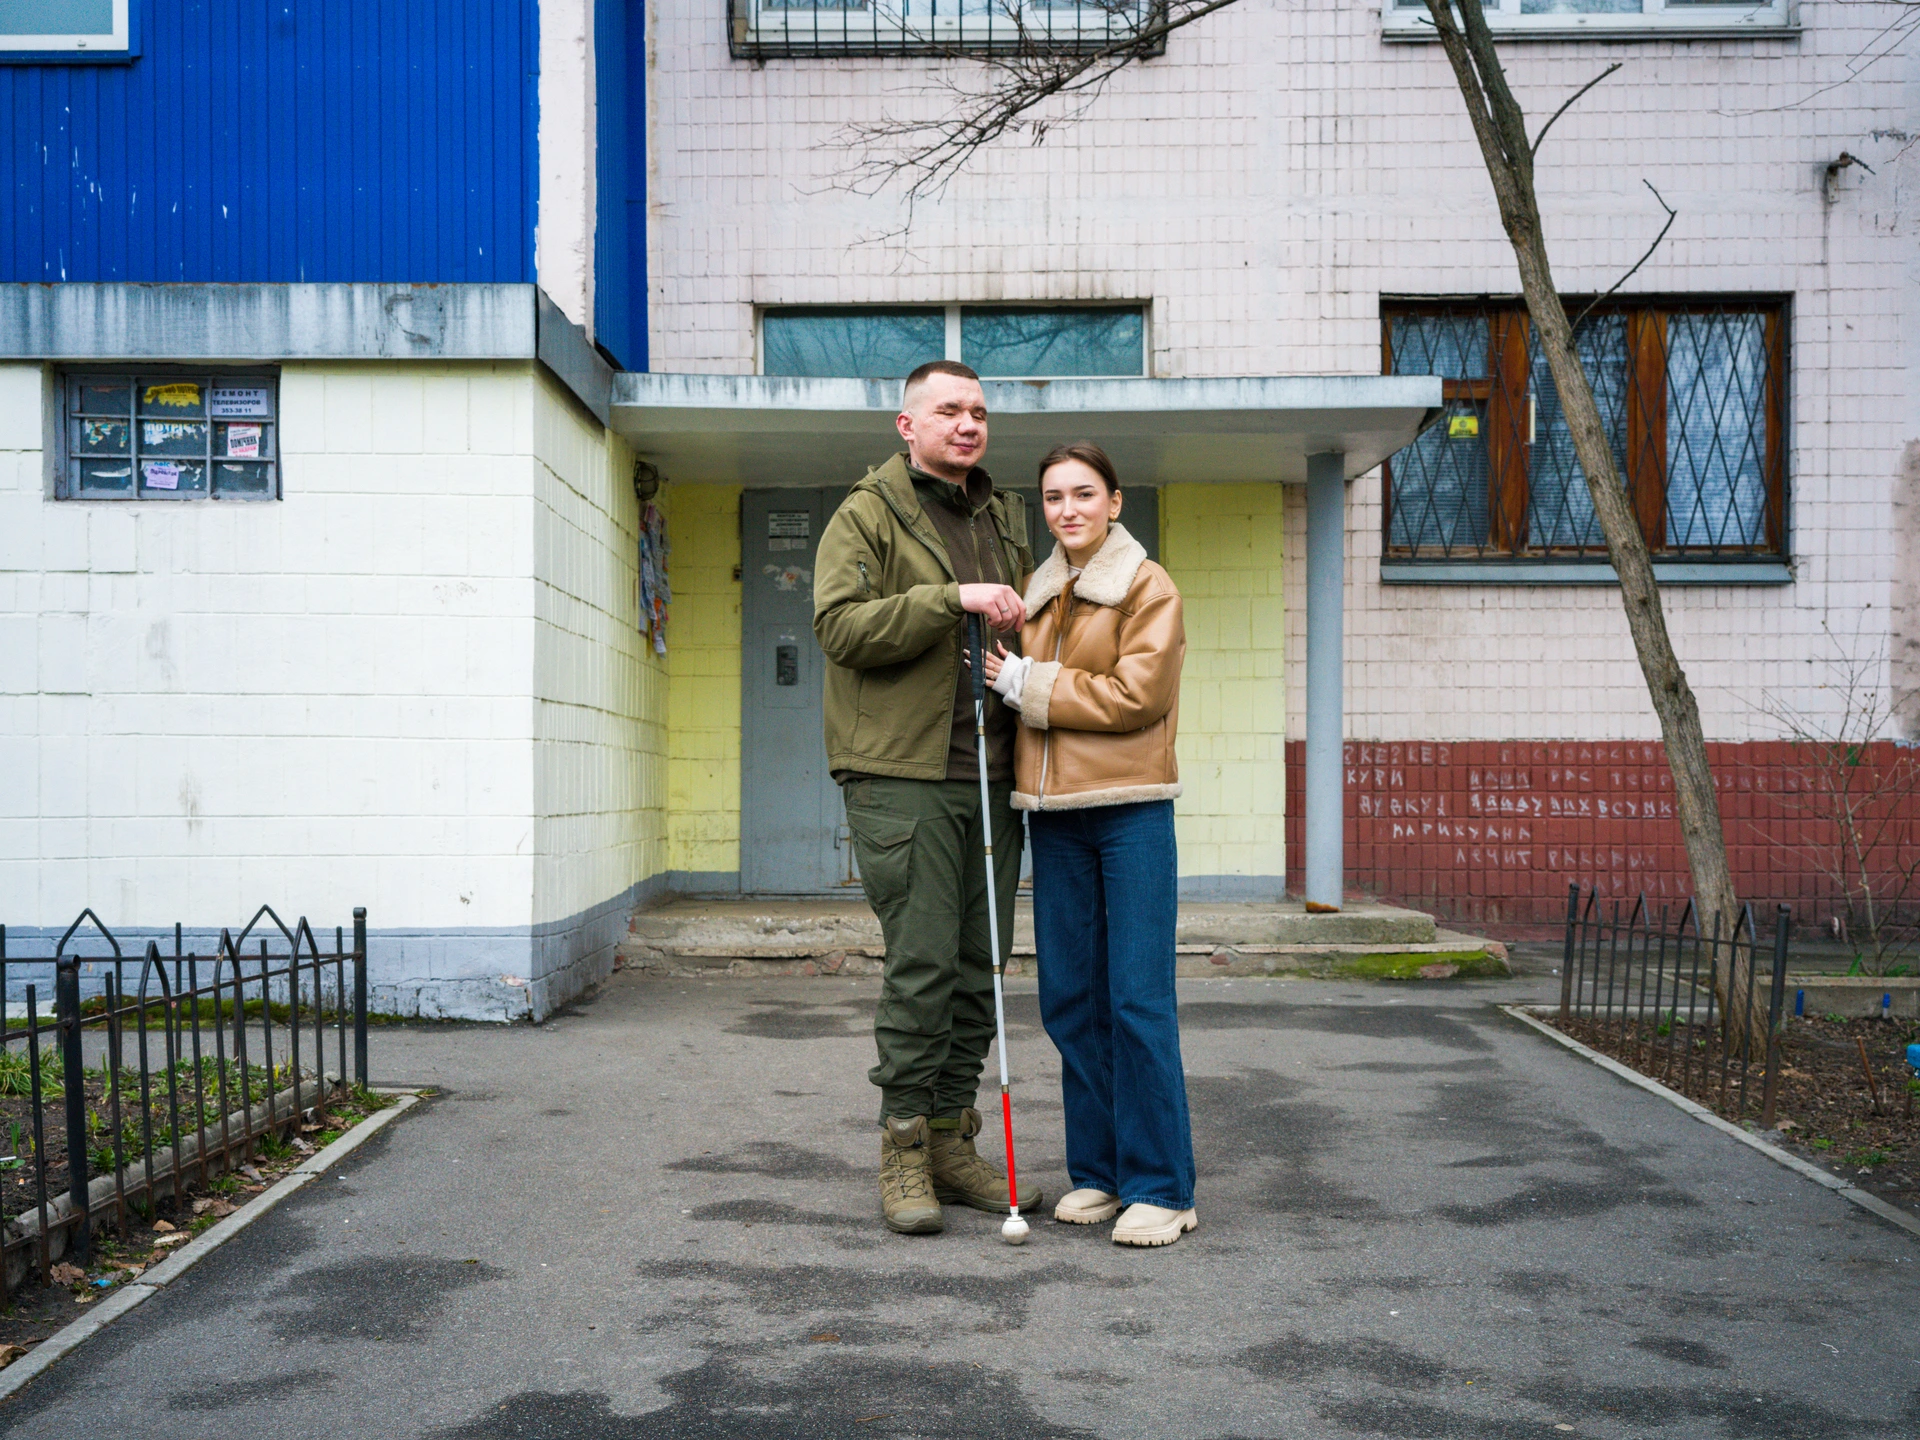 A man and a woman stand outside the entryway to a light-pink-tiled apartment building with brown-framed windows. The man, on the left, has short dark hair, closely cropped at the sides, and is wearing a khaki jacket with dark green combat trousers. He is holding a white cane and is facing away from the camera, with his eyes closed. He is Vladyslav Yeshchenko, the founder of Let's See The Victory charity which aids people who have lost their vision due to being injured in the war.The woman standing to the Vladyslav’s left is looking at the camera. She has dark hair tied in a ponytail, and is wearing a tan-coloured sheepskin jacket, baggy jeans, and beige shoes. She has her hand pressed on the man's abdomen, and is called Valeria Yeshchenko. She is the wife and co-worker of Vladyslav.